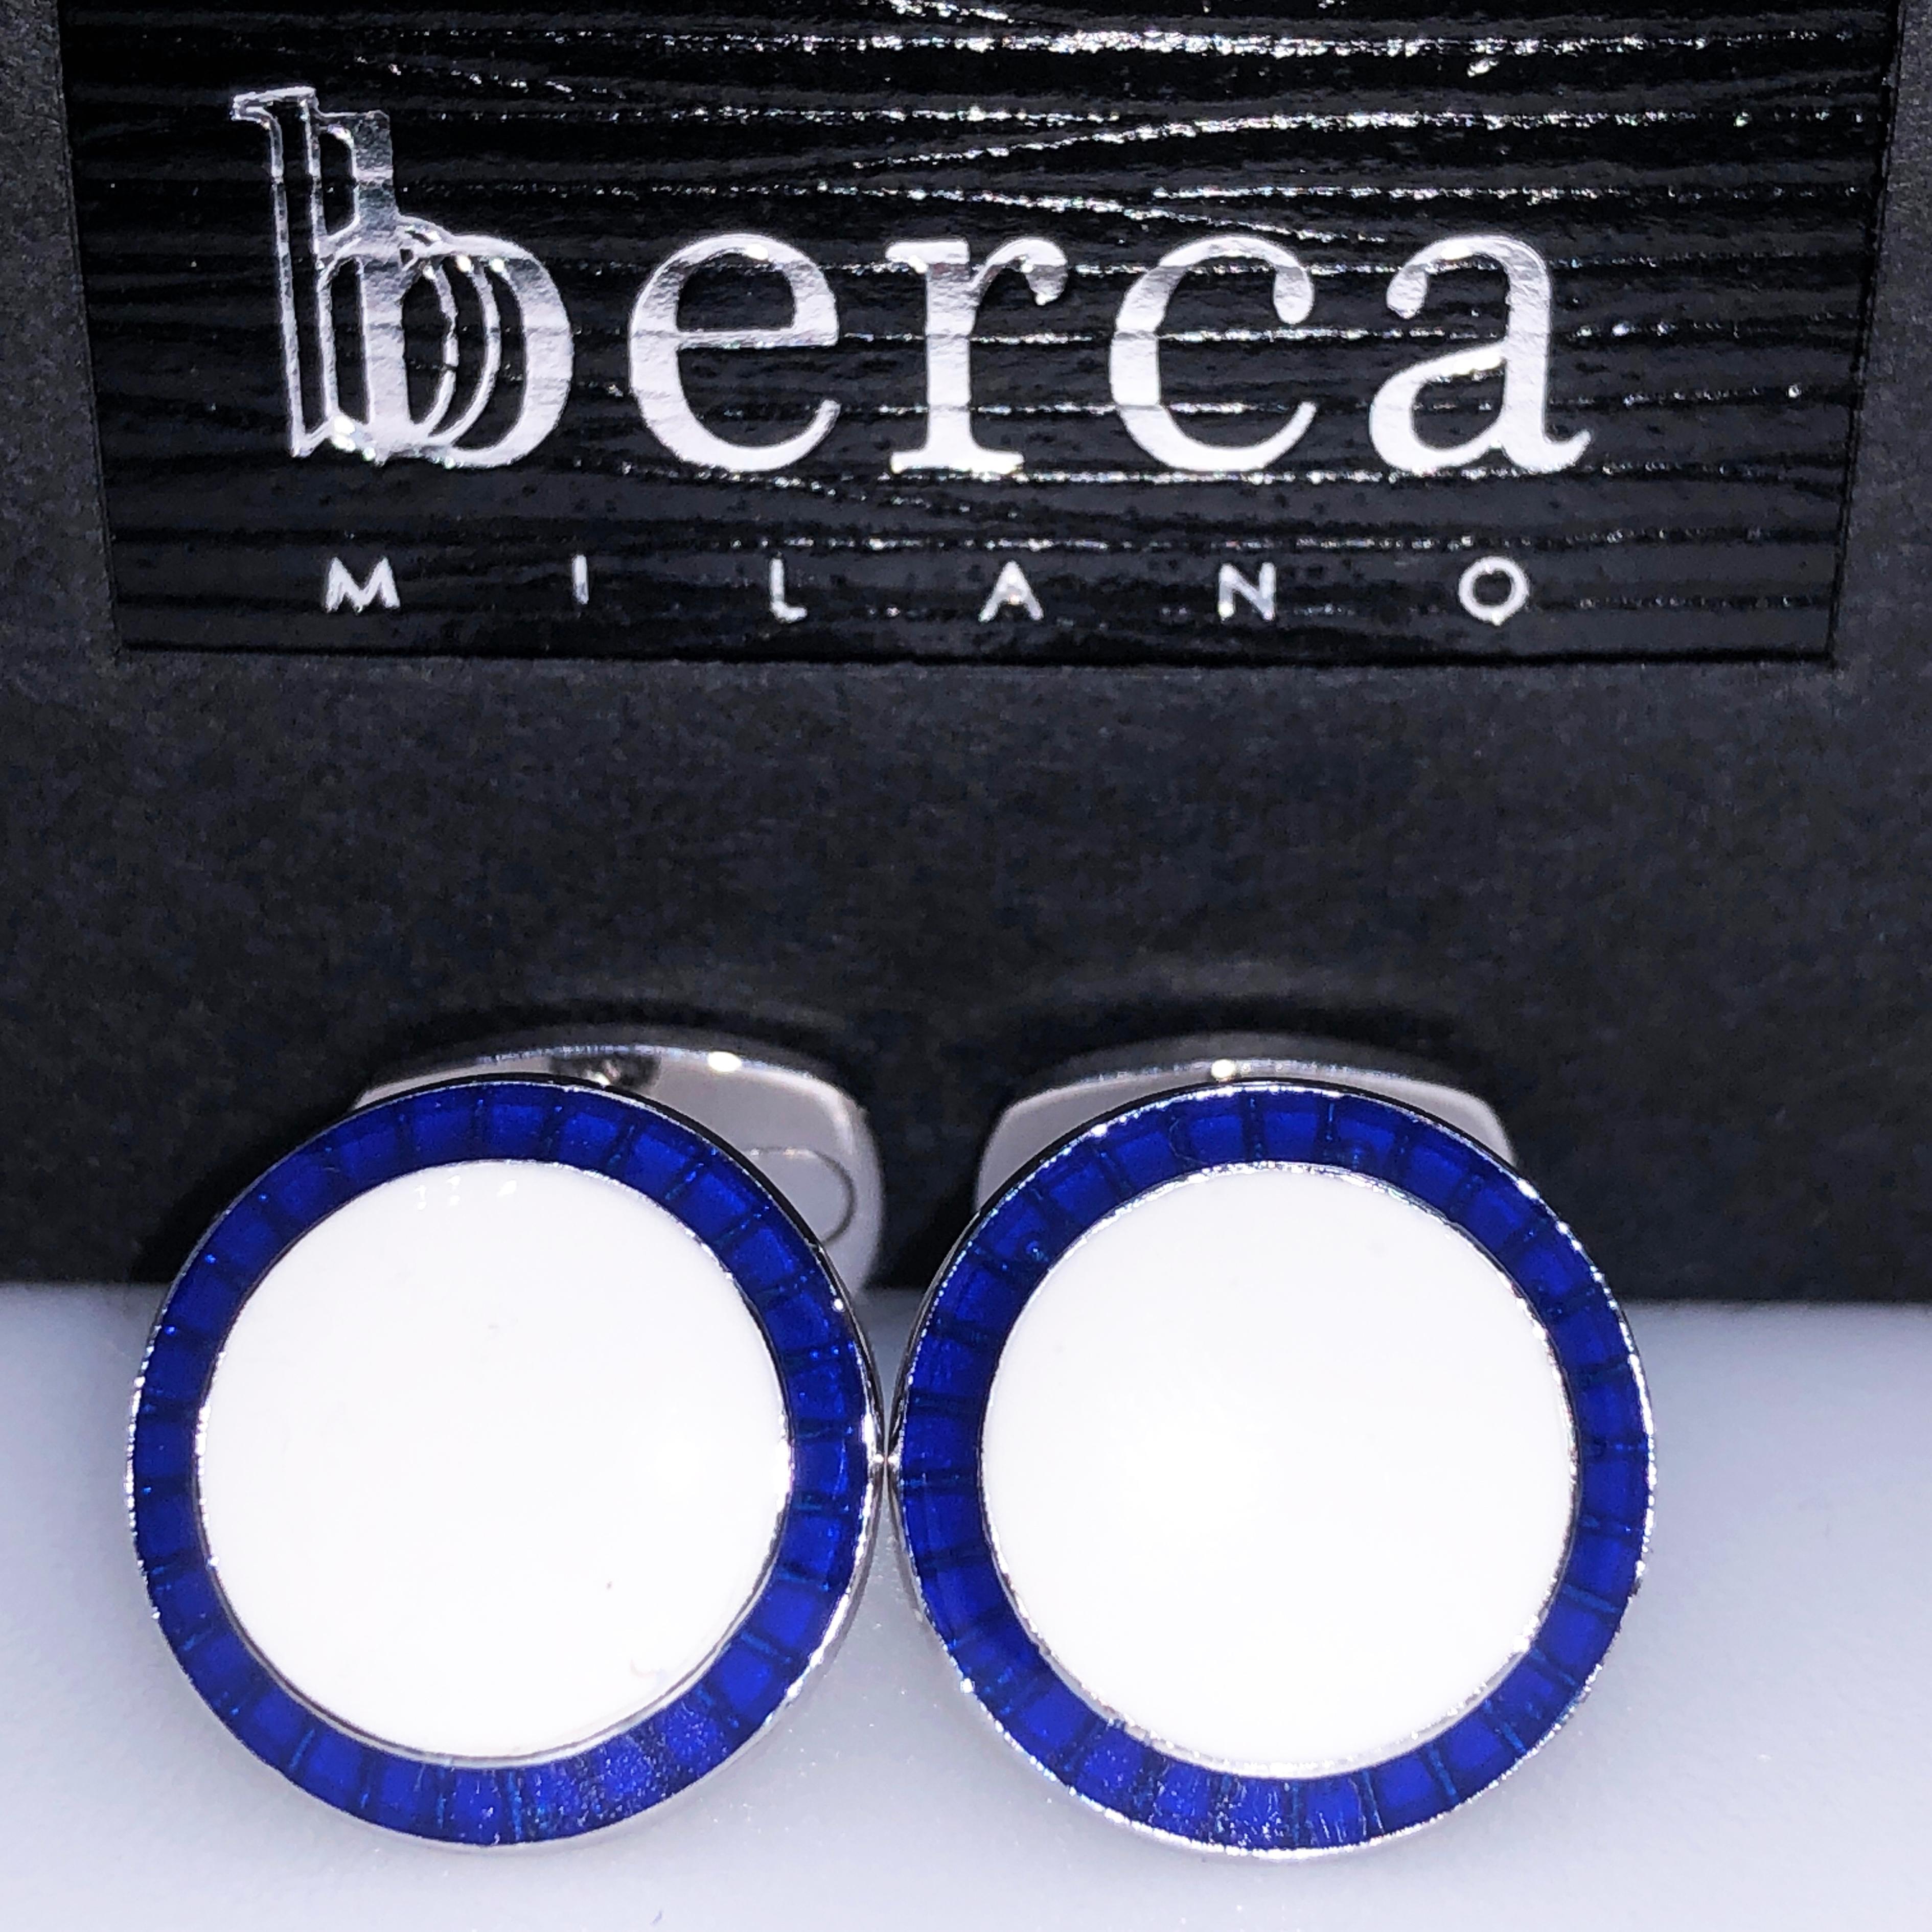 Chic yet Timeless Round White, Transparent Navy Blue Border Hand Enamelled Sterling Silver Cufflinks, T-bar back.

In our Smart Black Box and Pouch.

Front Diameter about 0.633 inches.